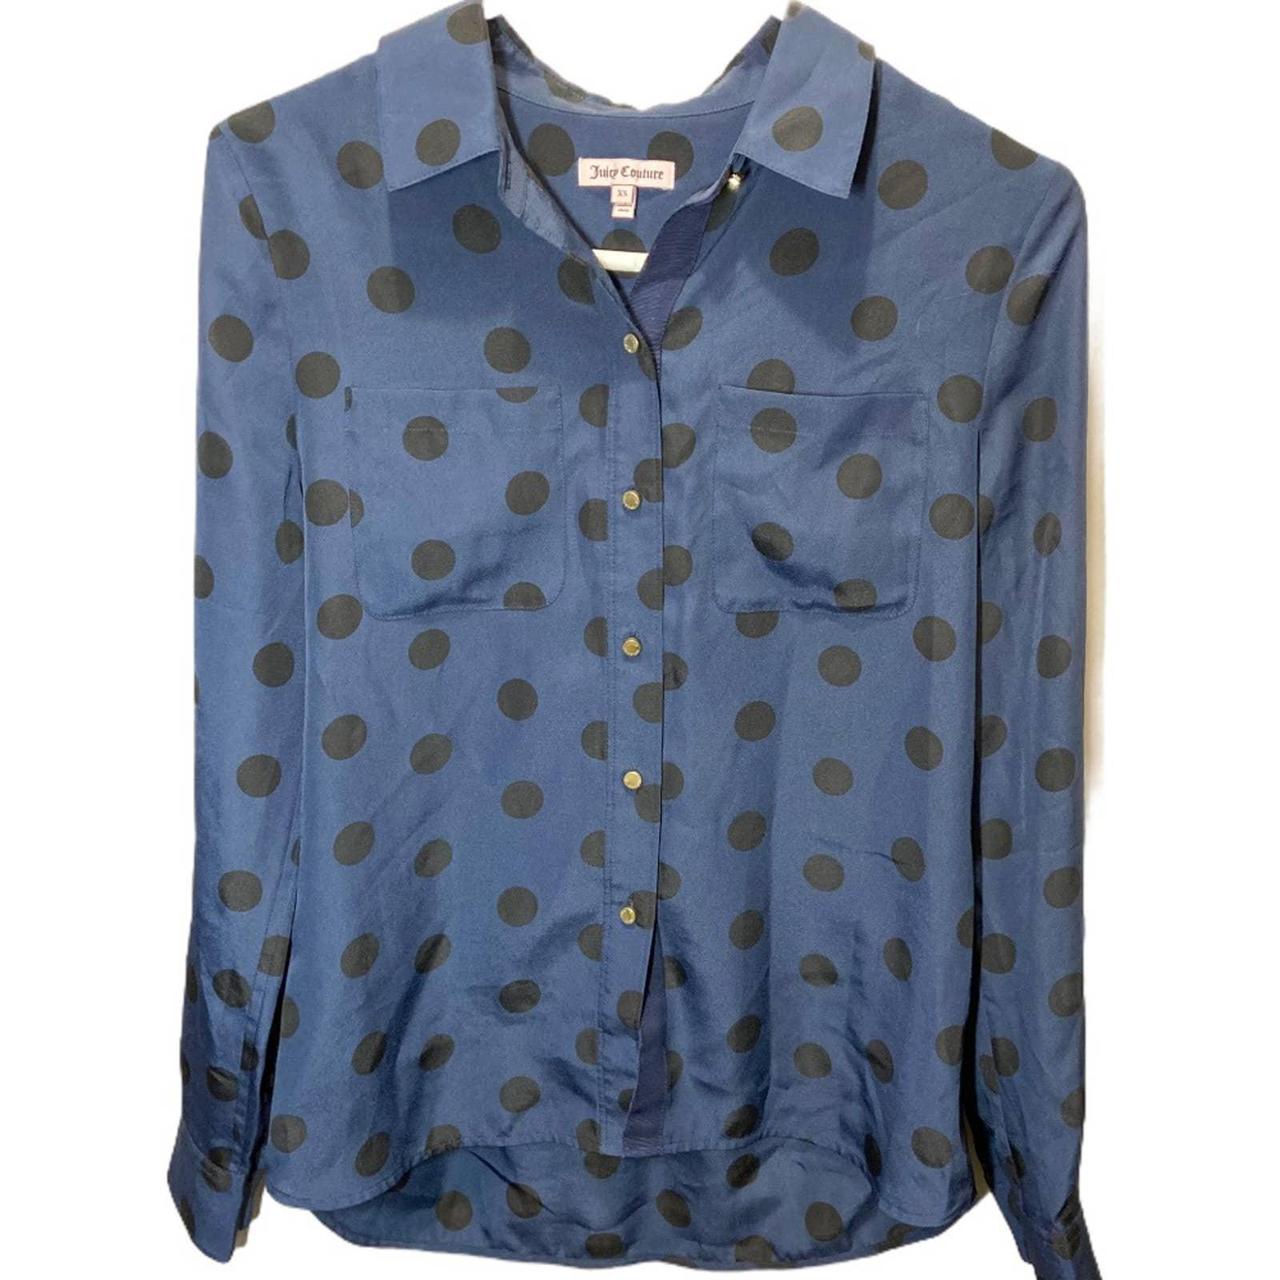 Product Image 1 - Juicy couture polka dot button